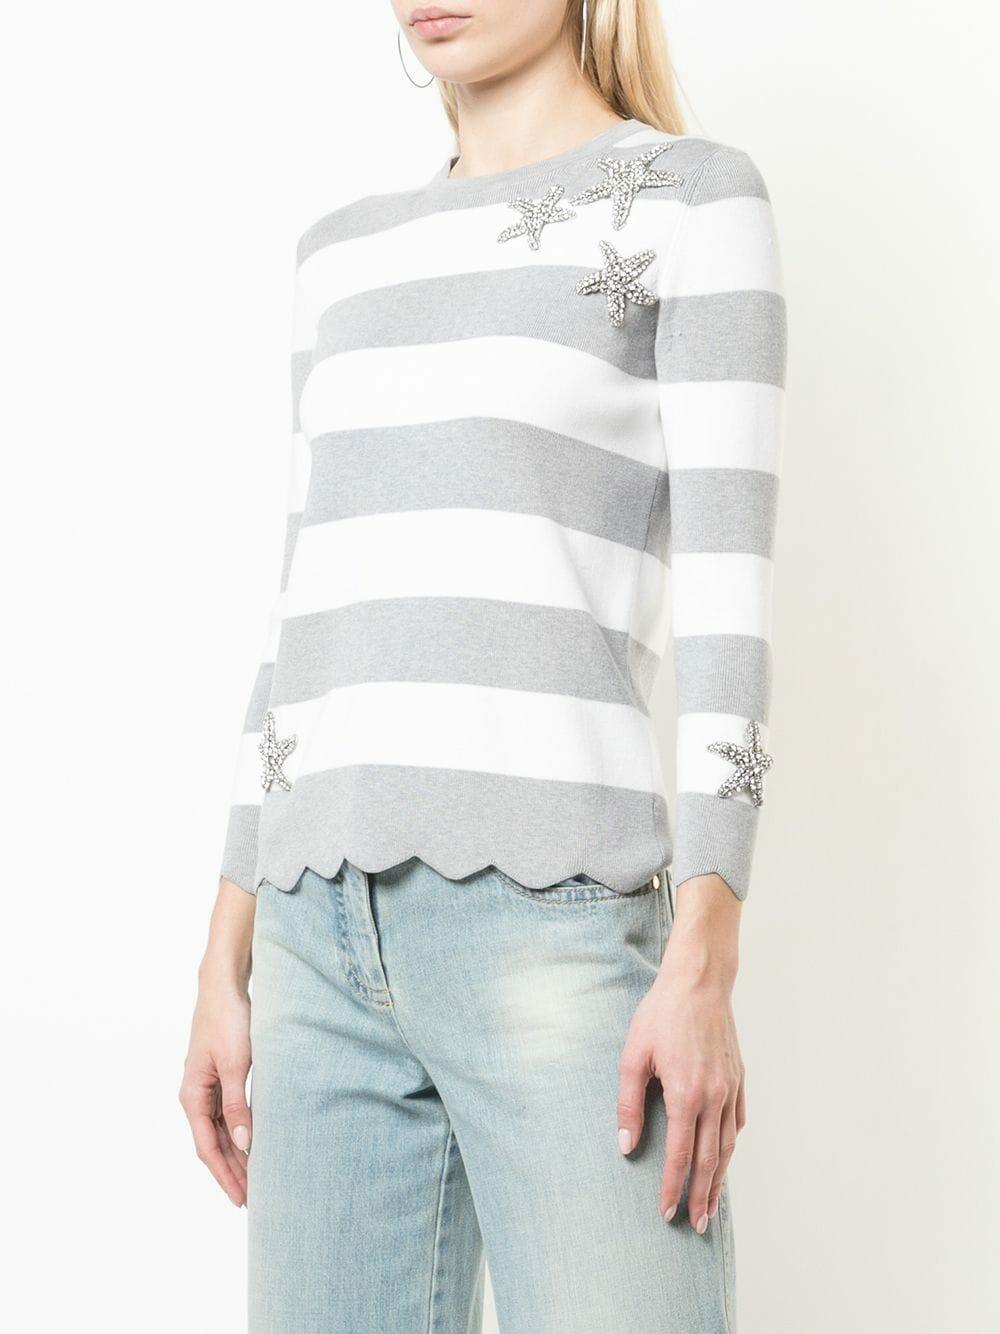 Michael Kors Collection - Pearl Gray & White Striped Starfish Sweater